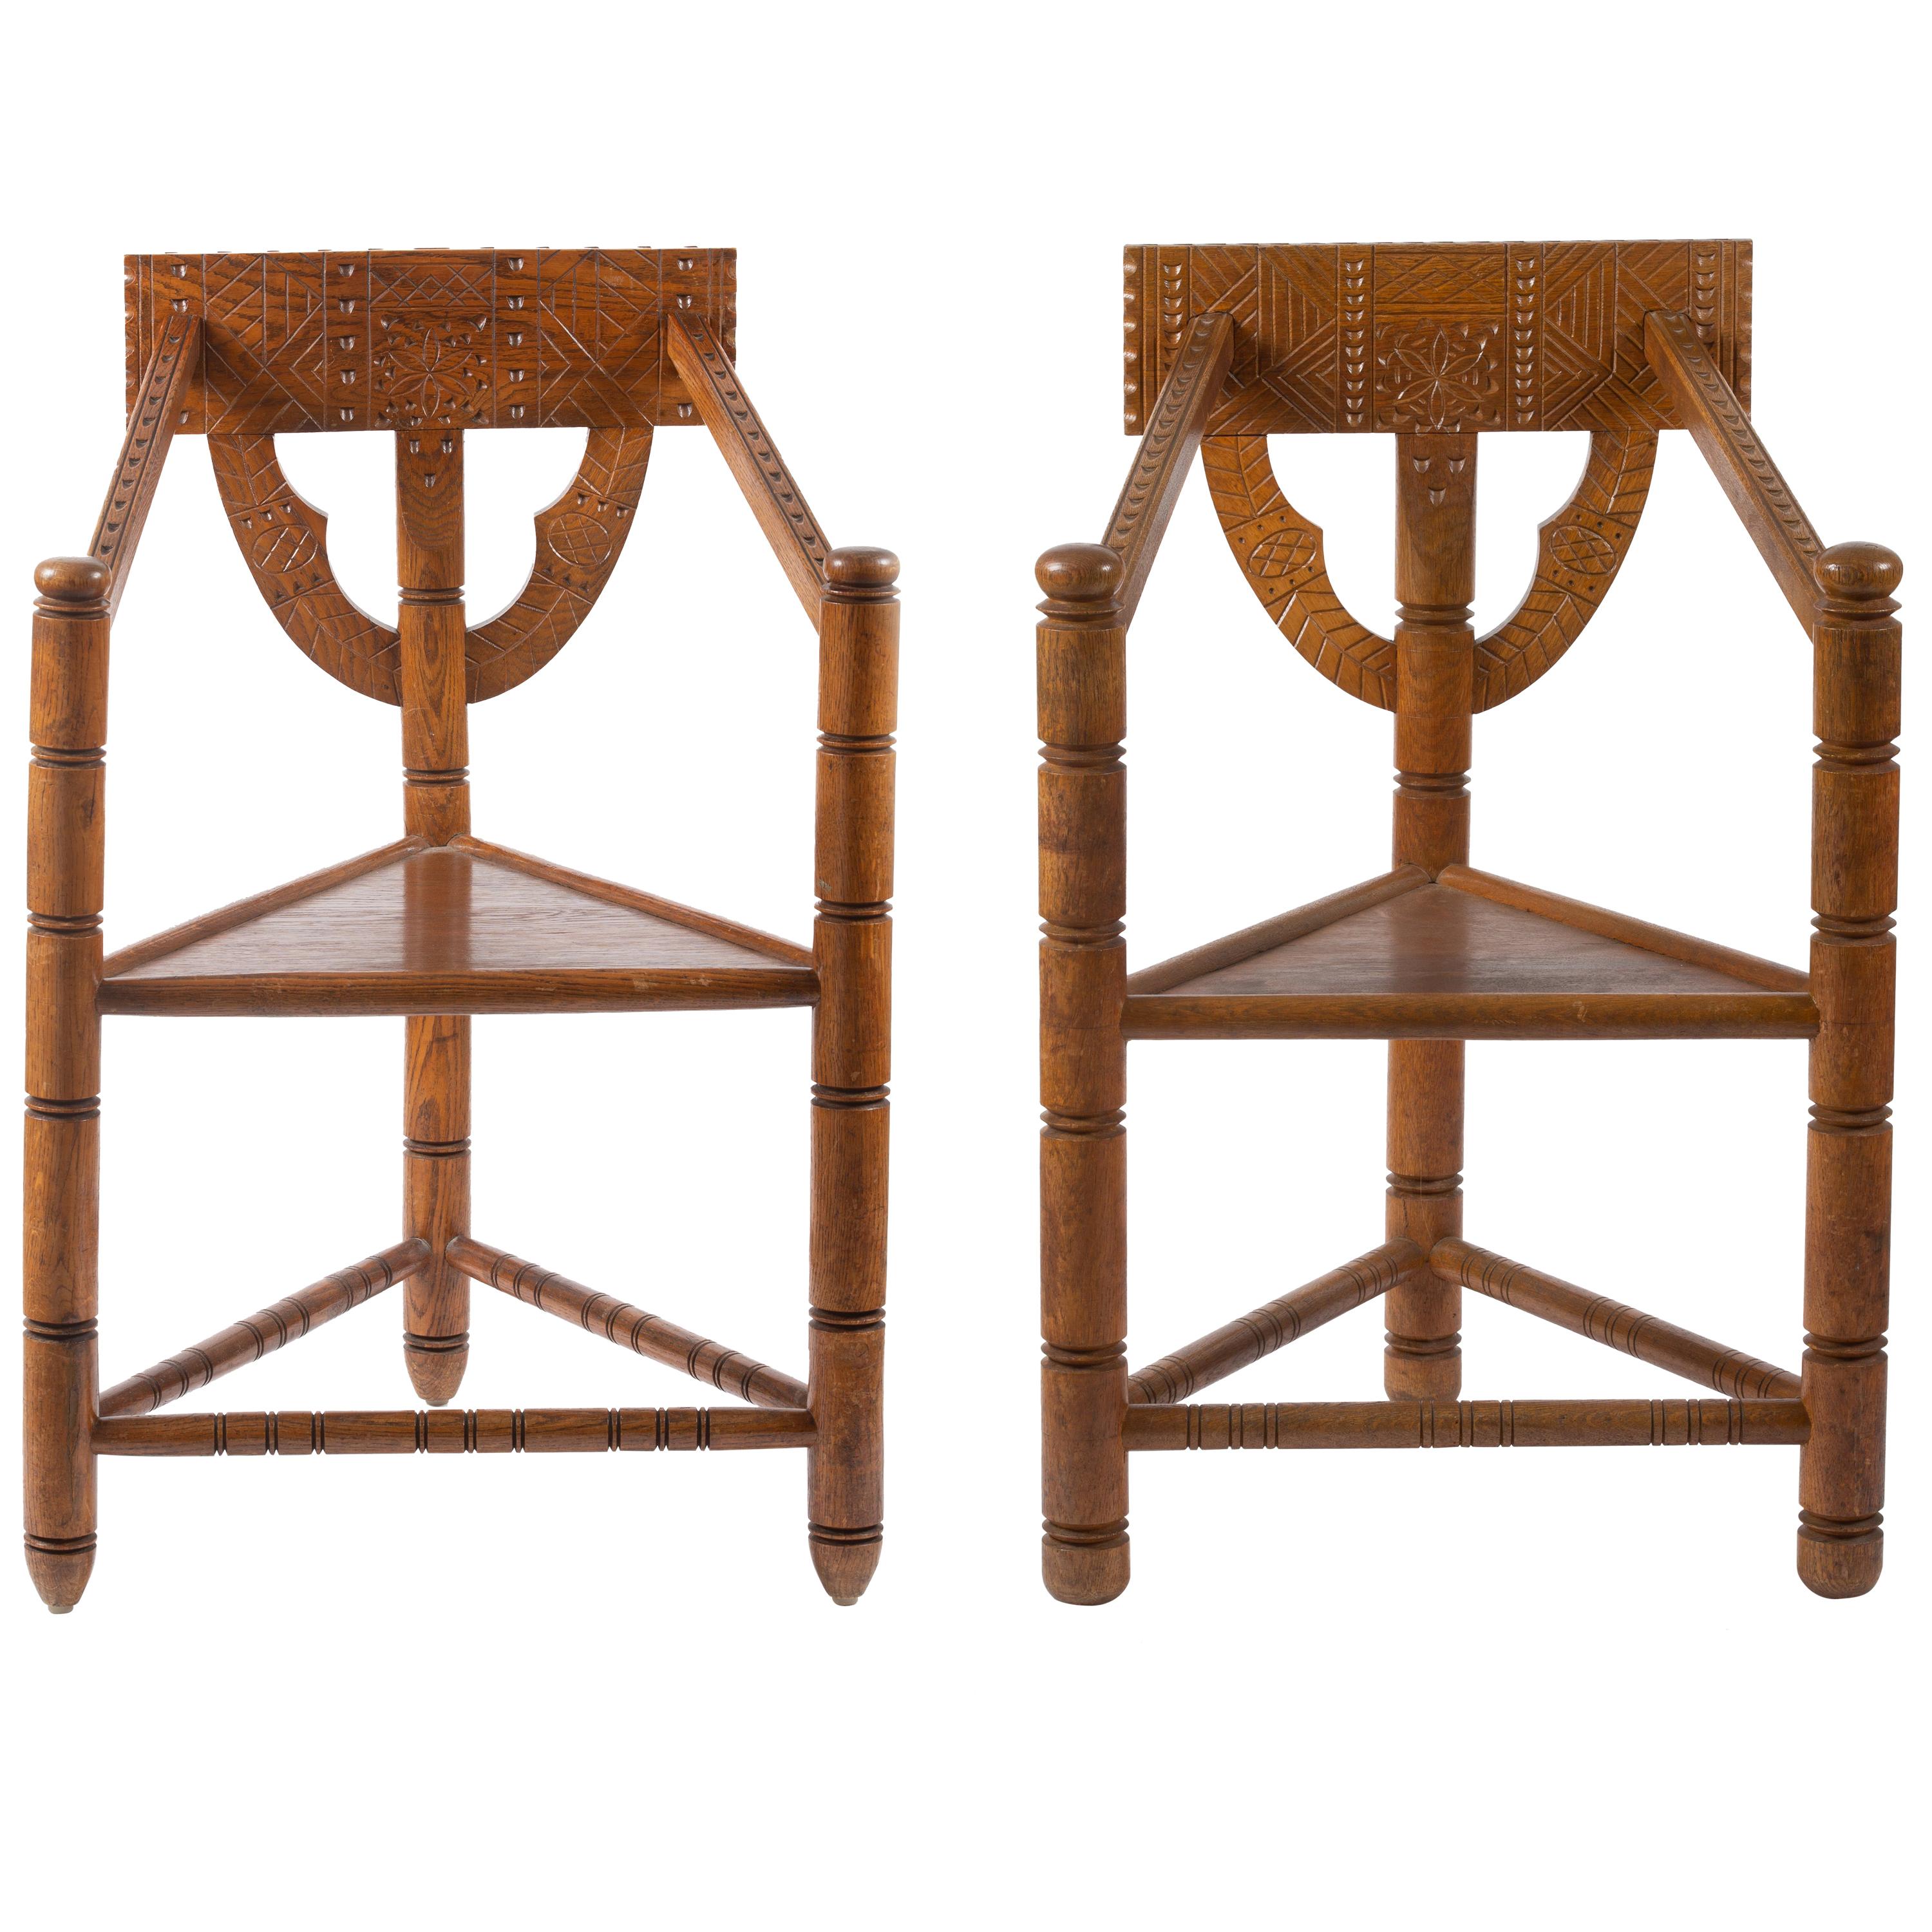 1900 Pair of Swedish Carved Ornament Wooden Armchairs